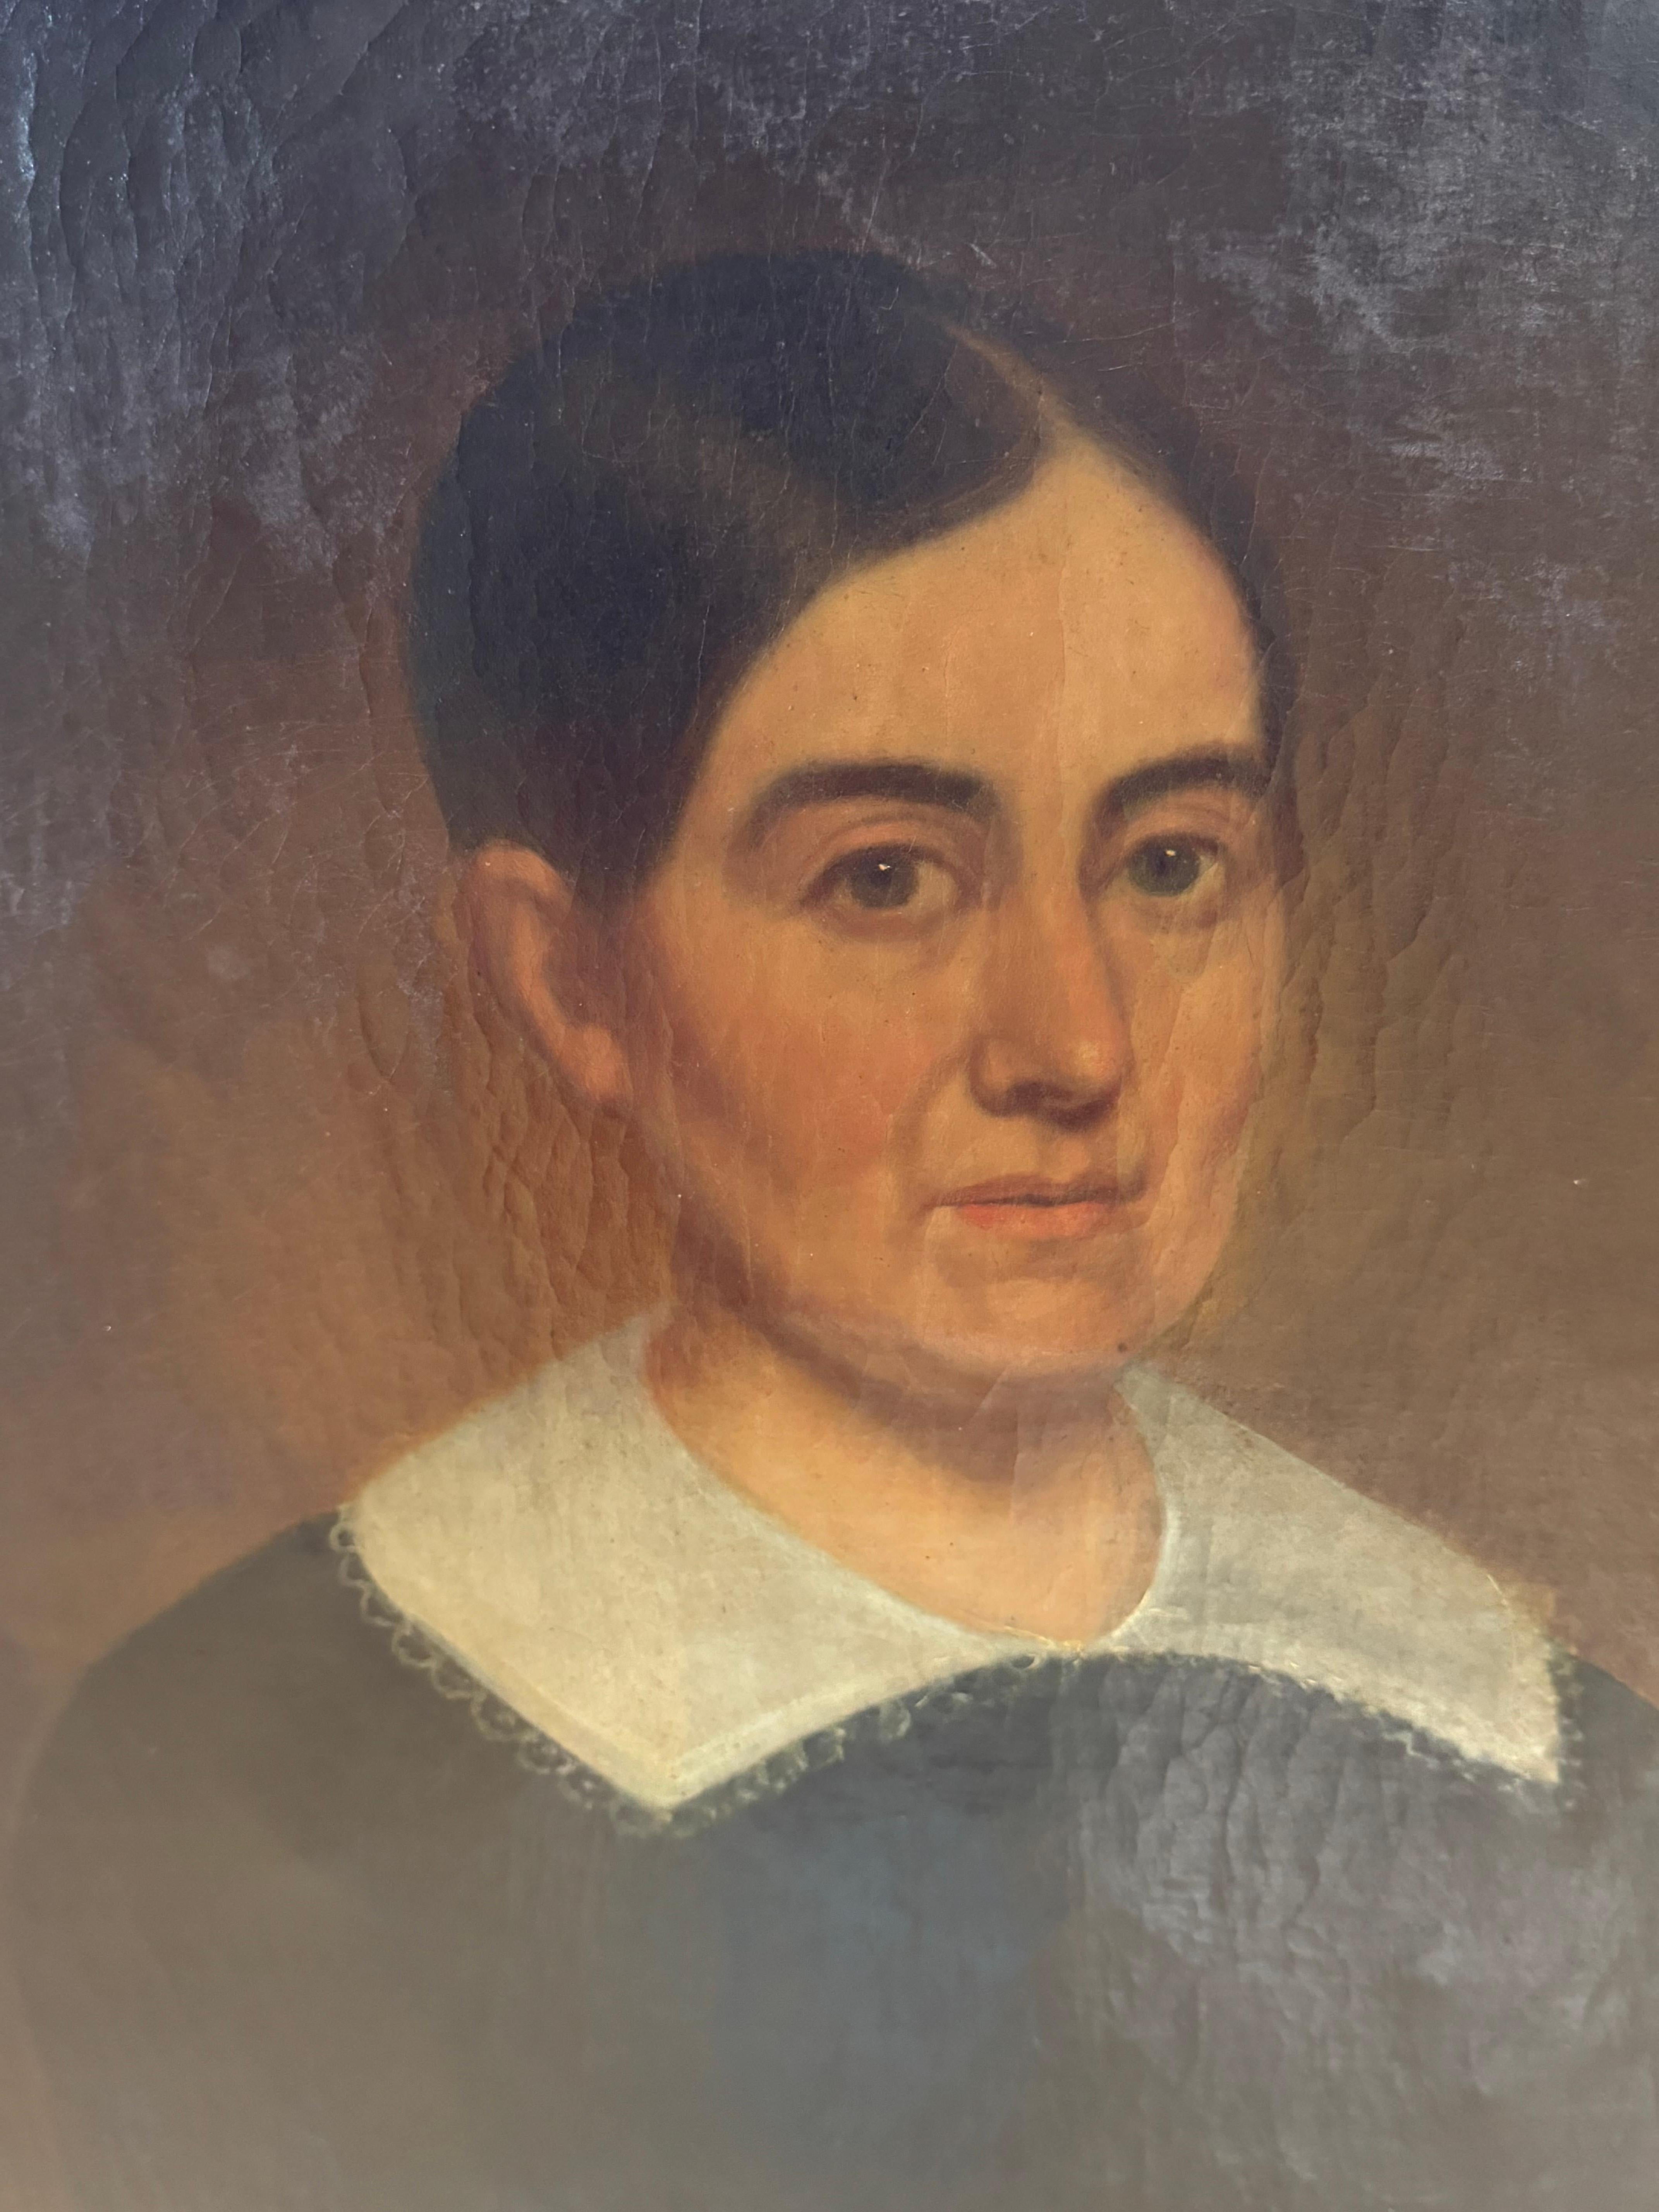 19th century female portrait, painting

No visible signature

Oil on canvas

23.25 x 30 unframed